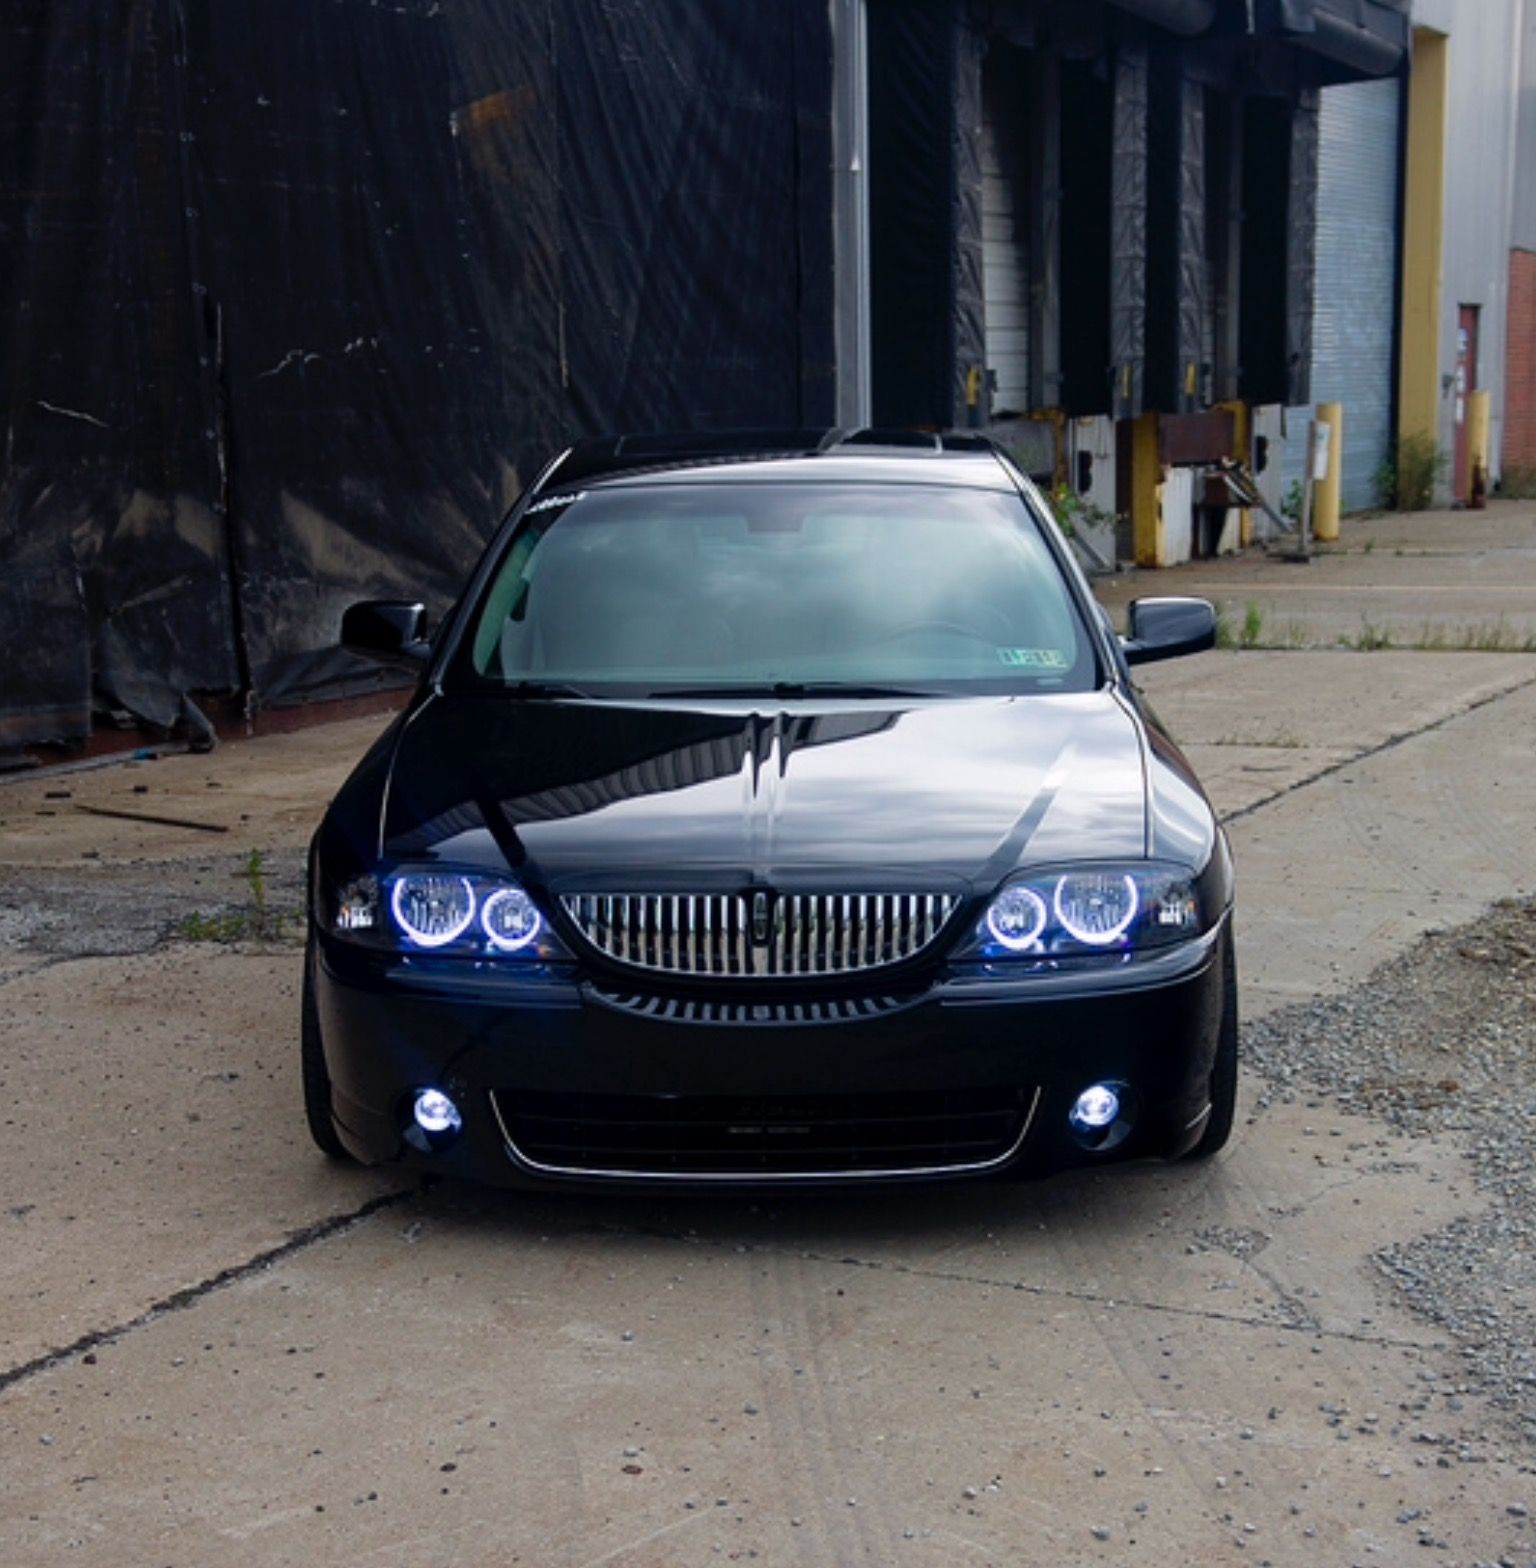 Lincoln ls black | Lincoln cars, Lincoln ls, Cool car pictures